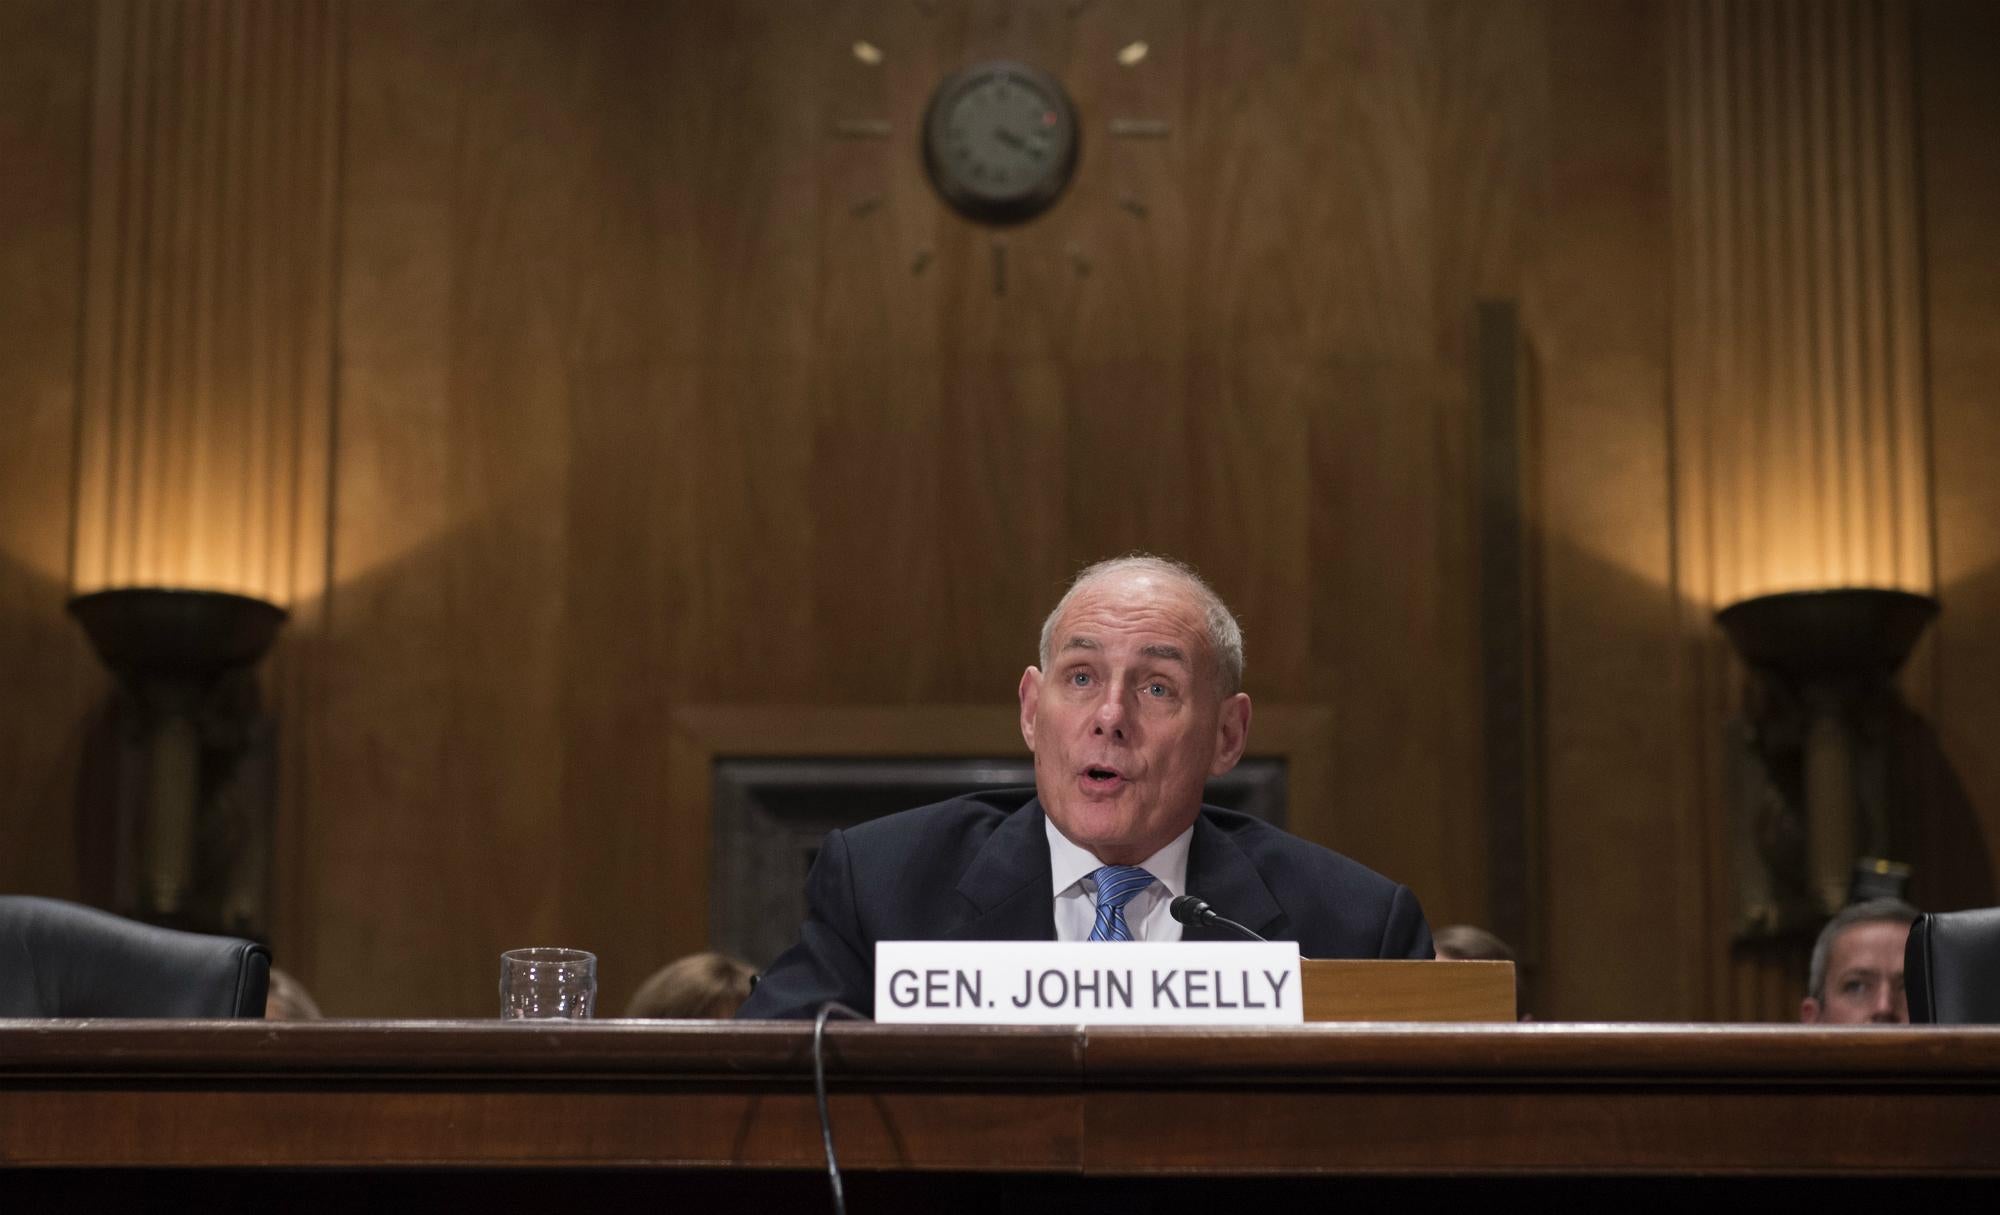 Trump nominated Kelly to become head the Department of Homeland Security, a cabinet-level position